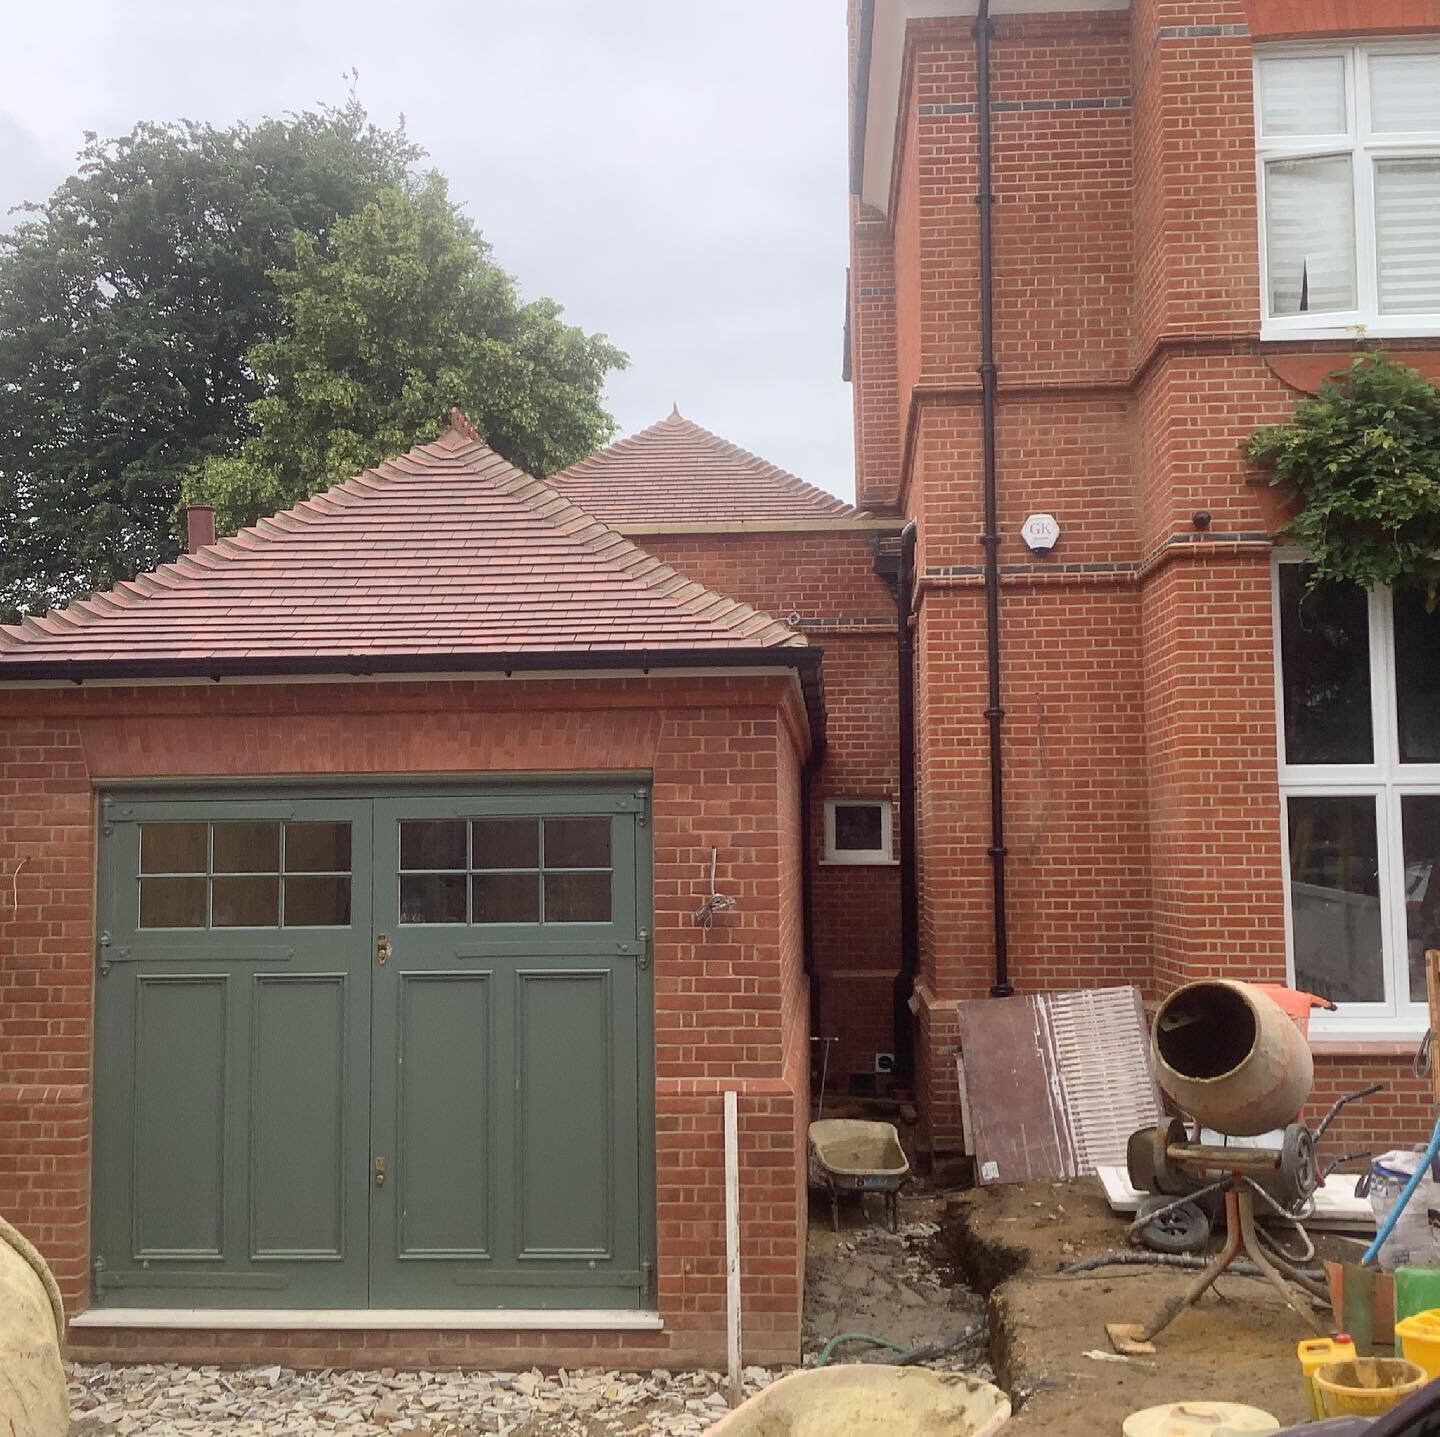 Between customer meetings in South West London today, I took the opportunity to call on to site where our Heritage Imperial light Multi brick has been supplied. 15k bricks have been used on a new front garage and rear extension. Along with new precas